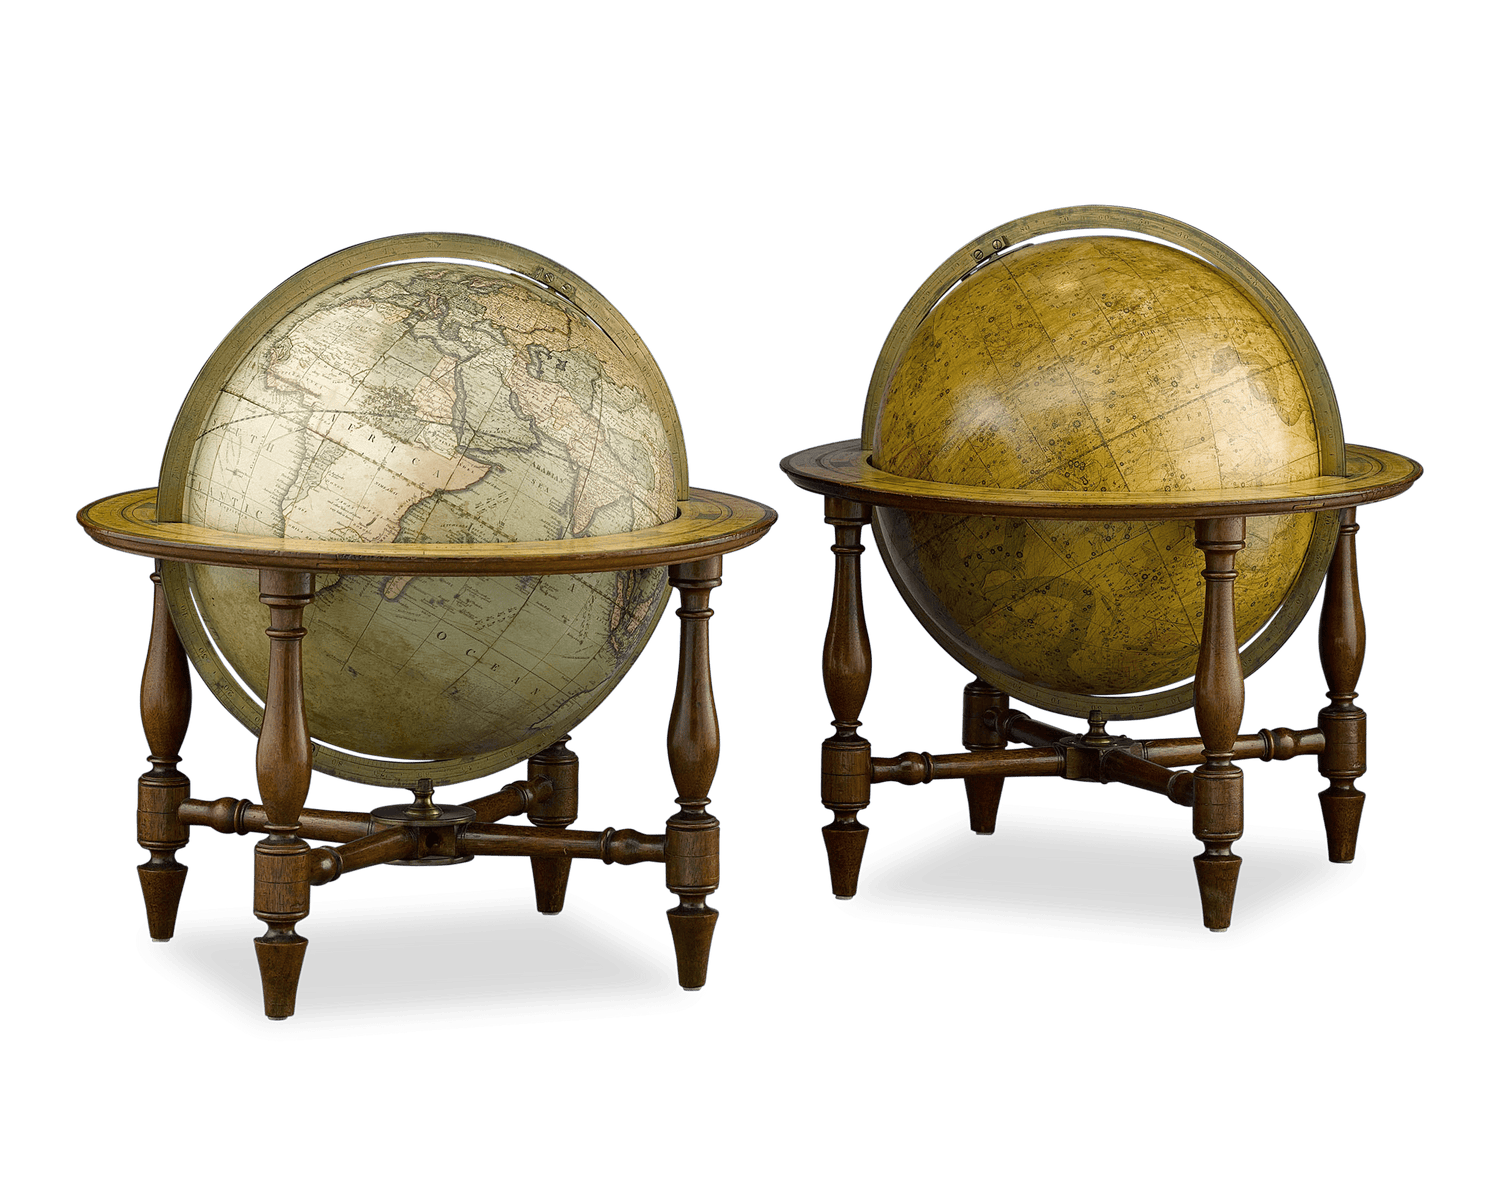 This excellent pair of Regency table globes was crafted by the celebrated  J. & W. Cary of London